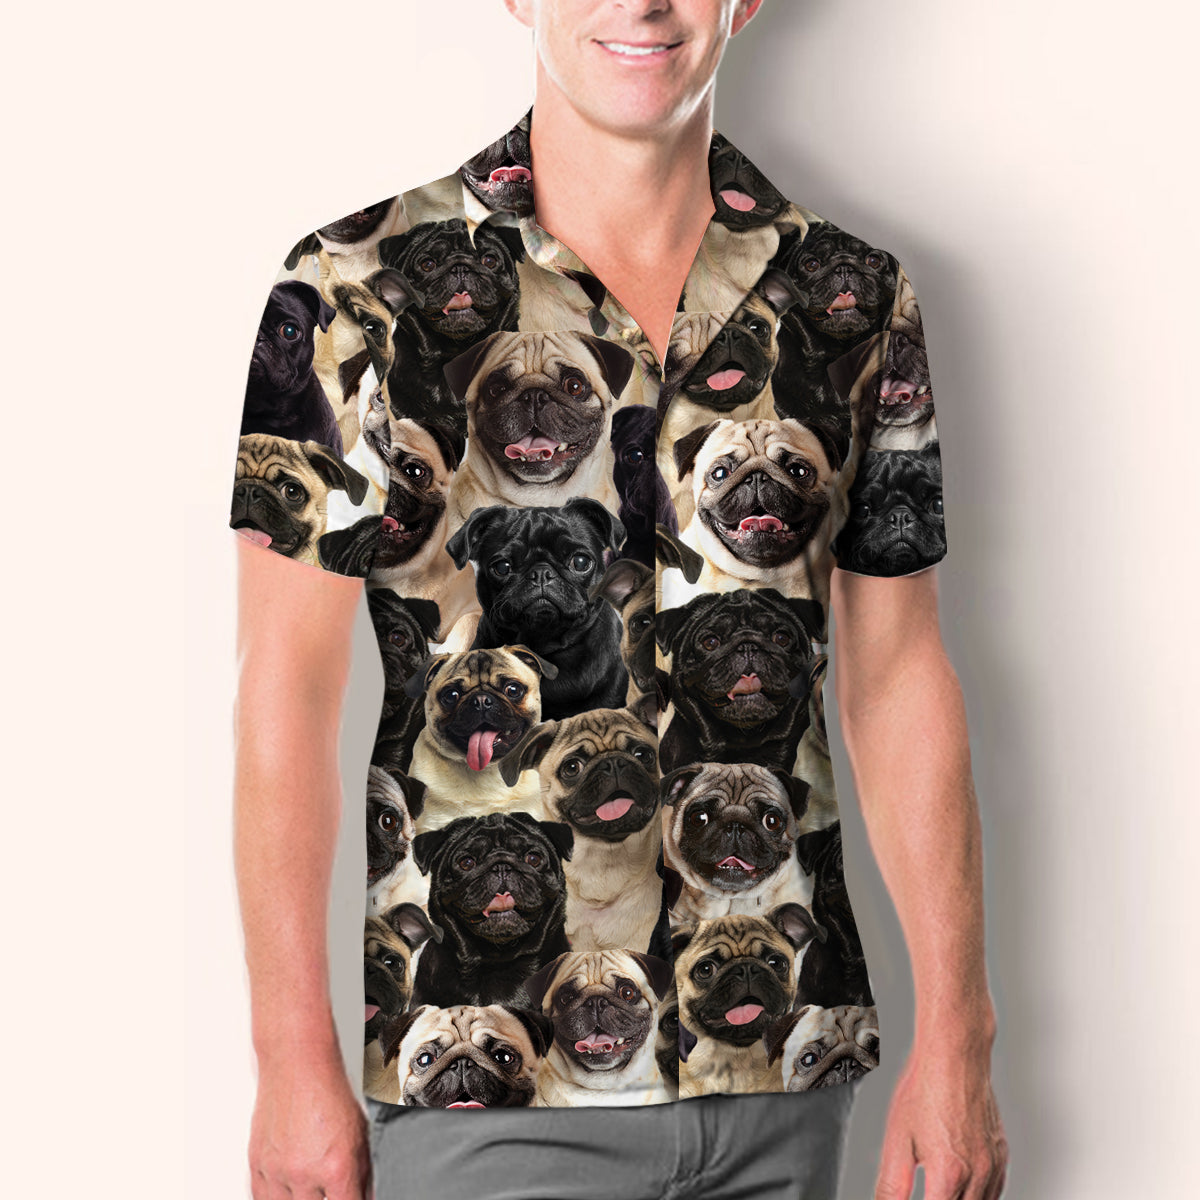 You Will Have A Bunch Of Pugs - Shirt V1